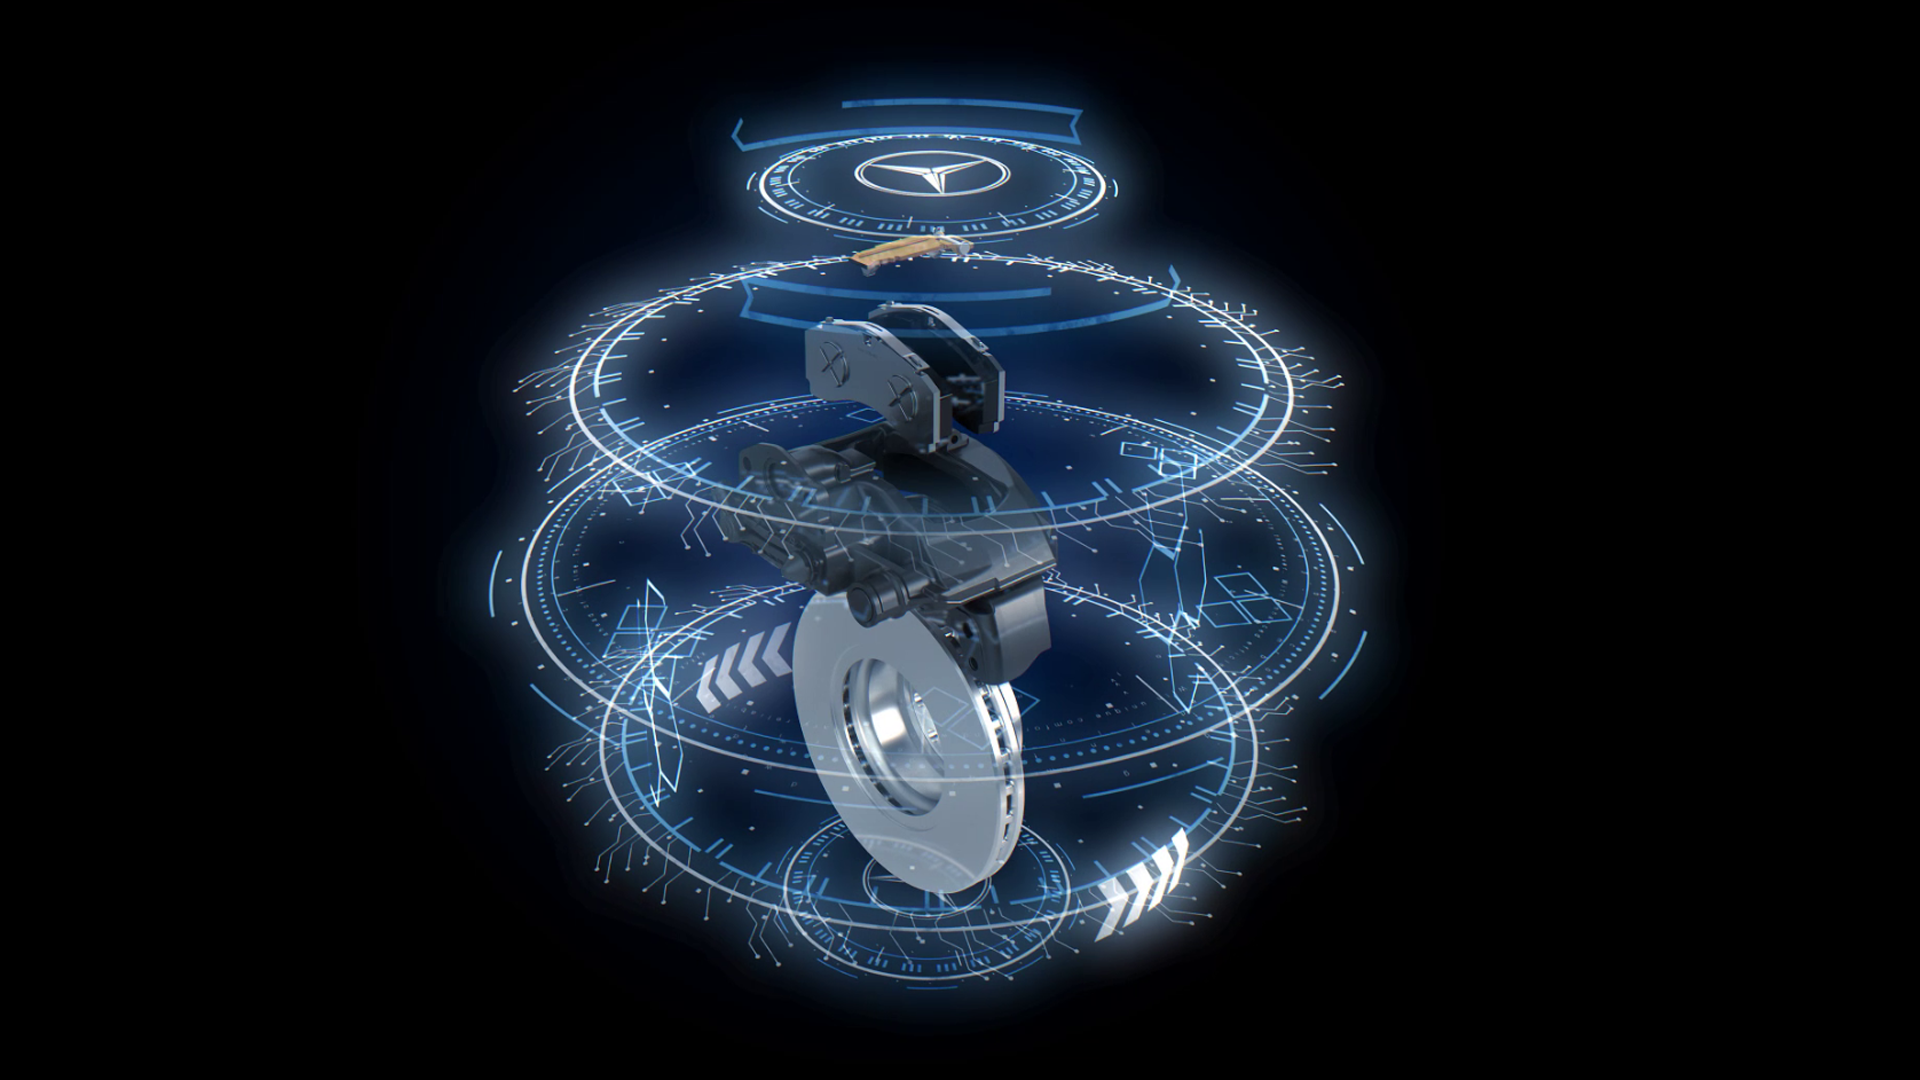 Contents of the Actros brake as an interesting diagram in white and blue tones